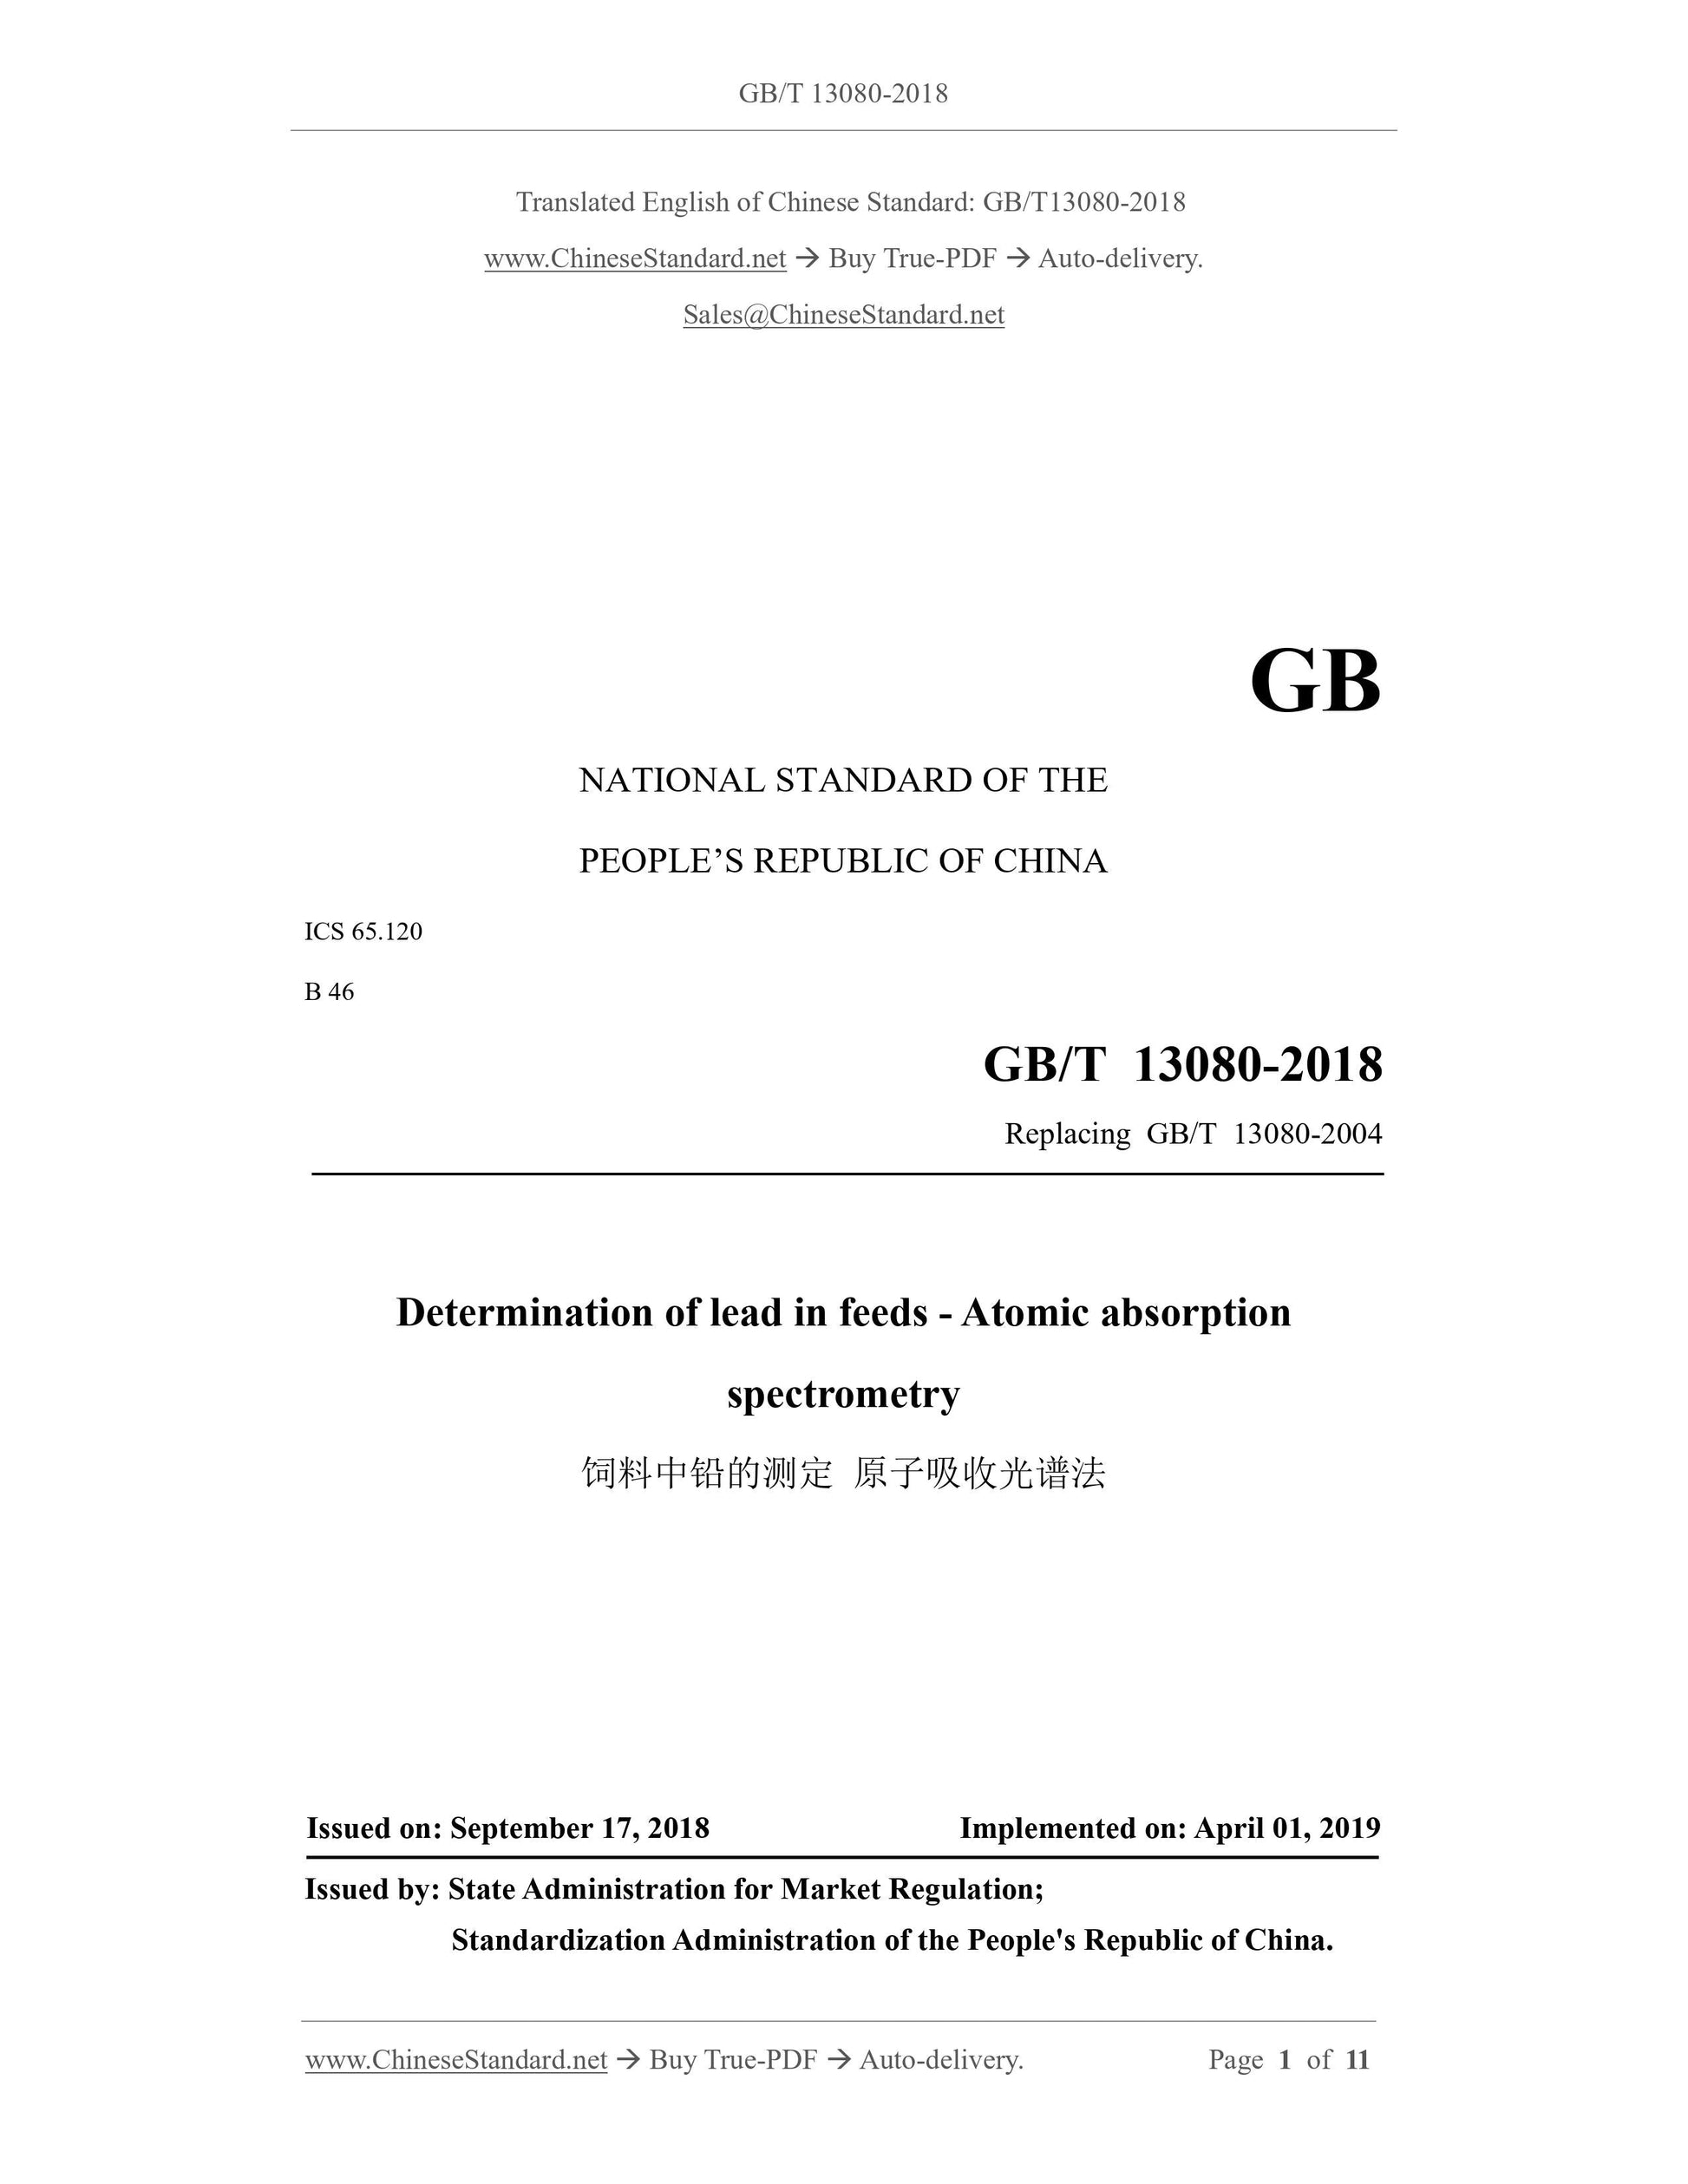 GB/T 13080-2018 Page 1